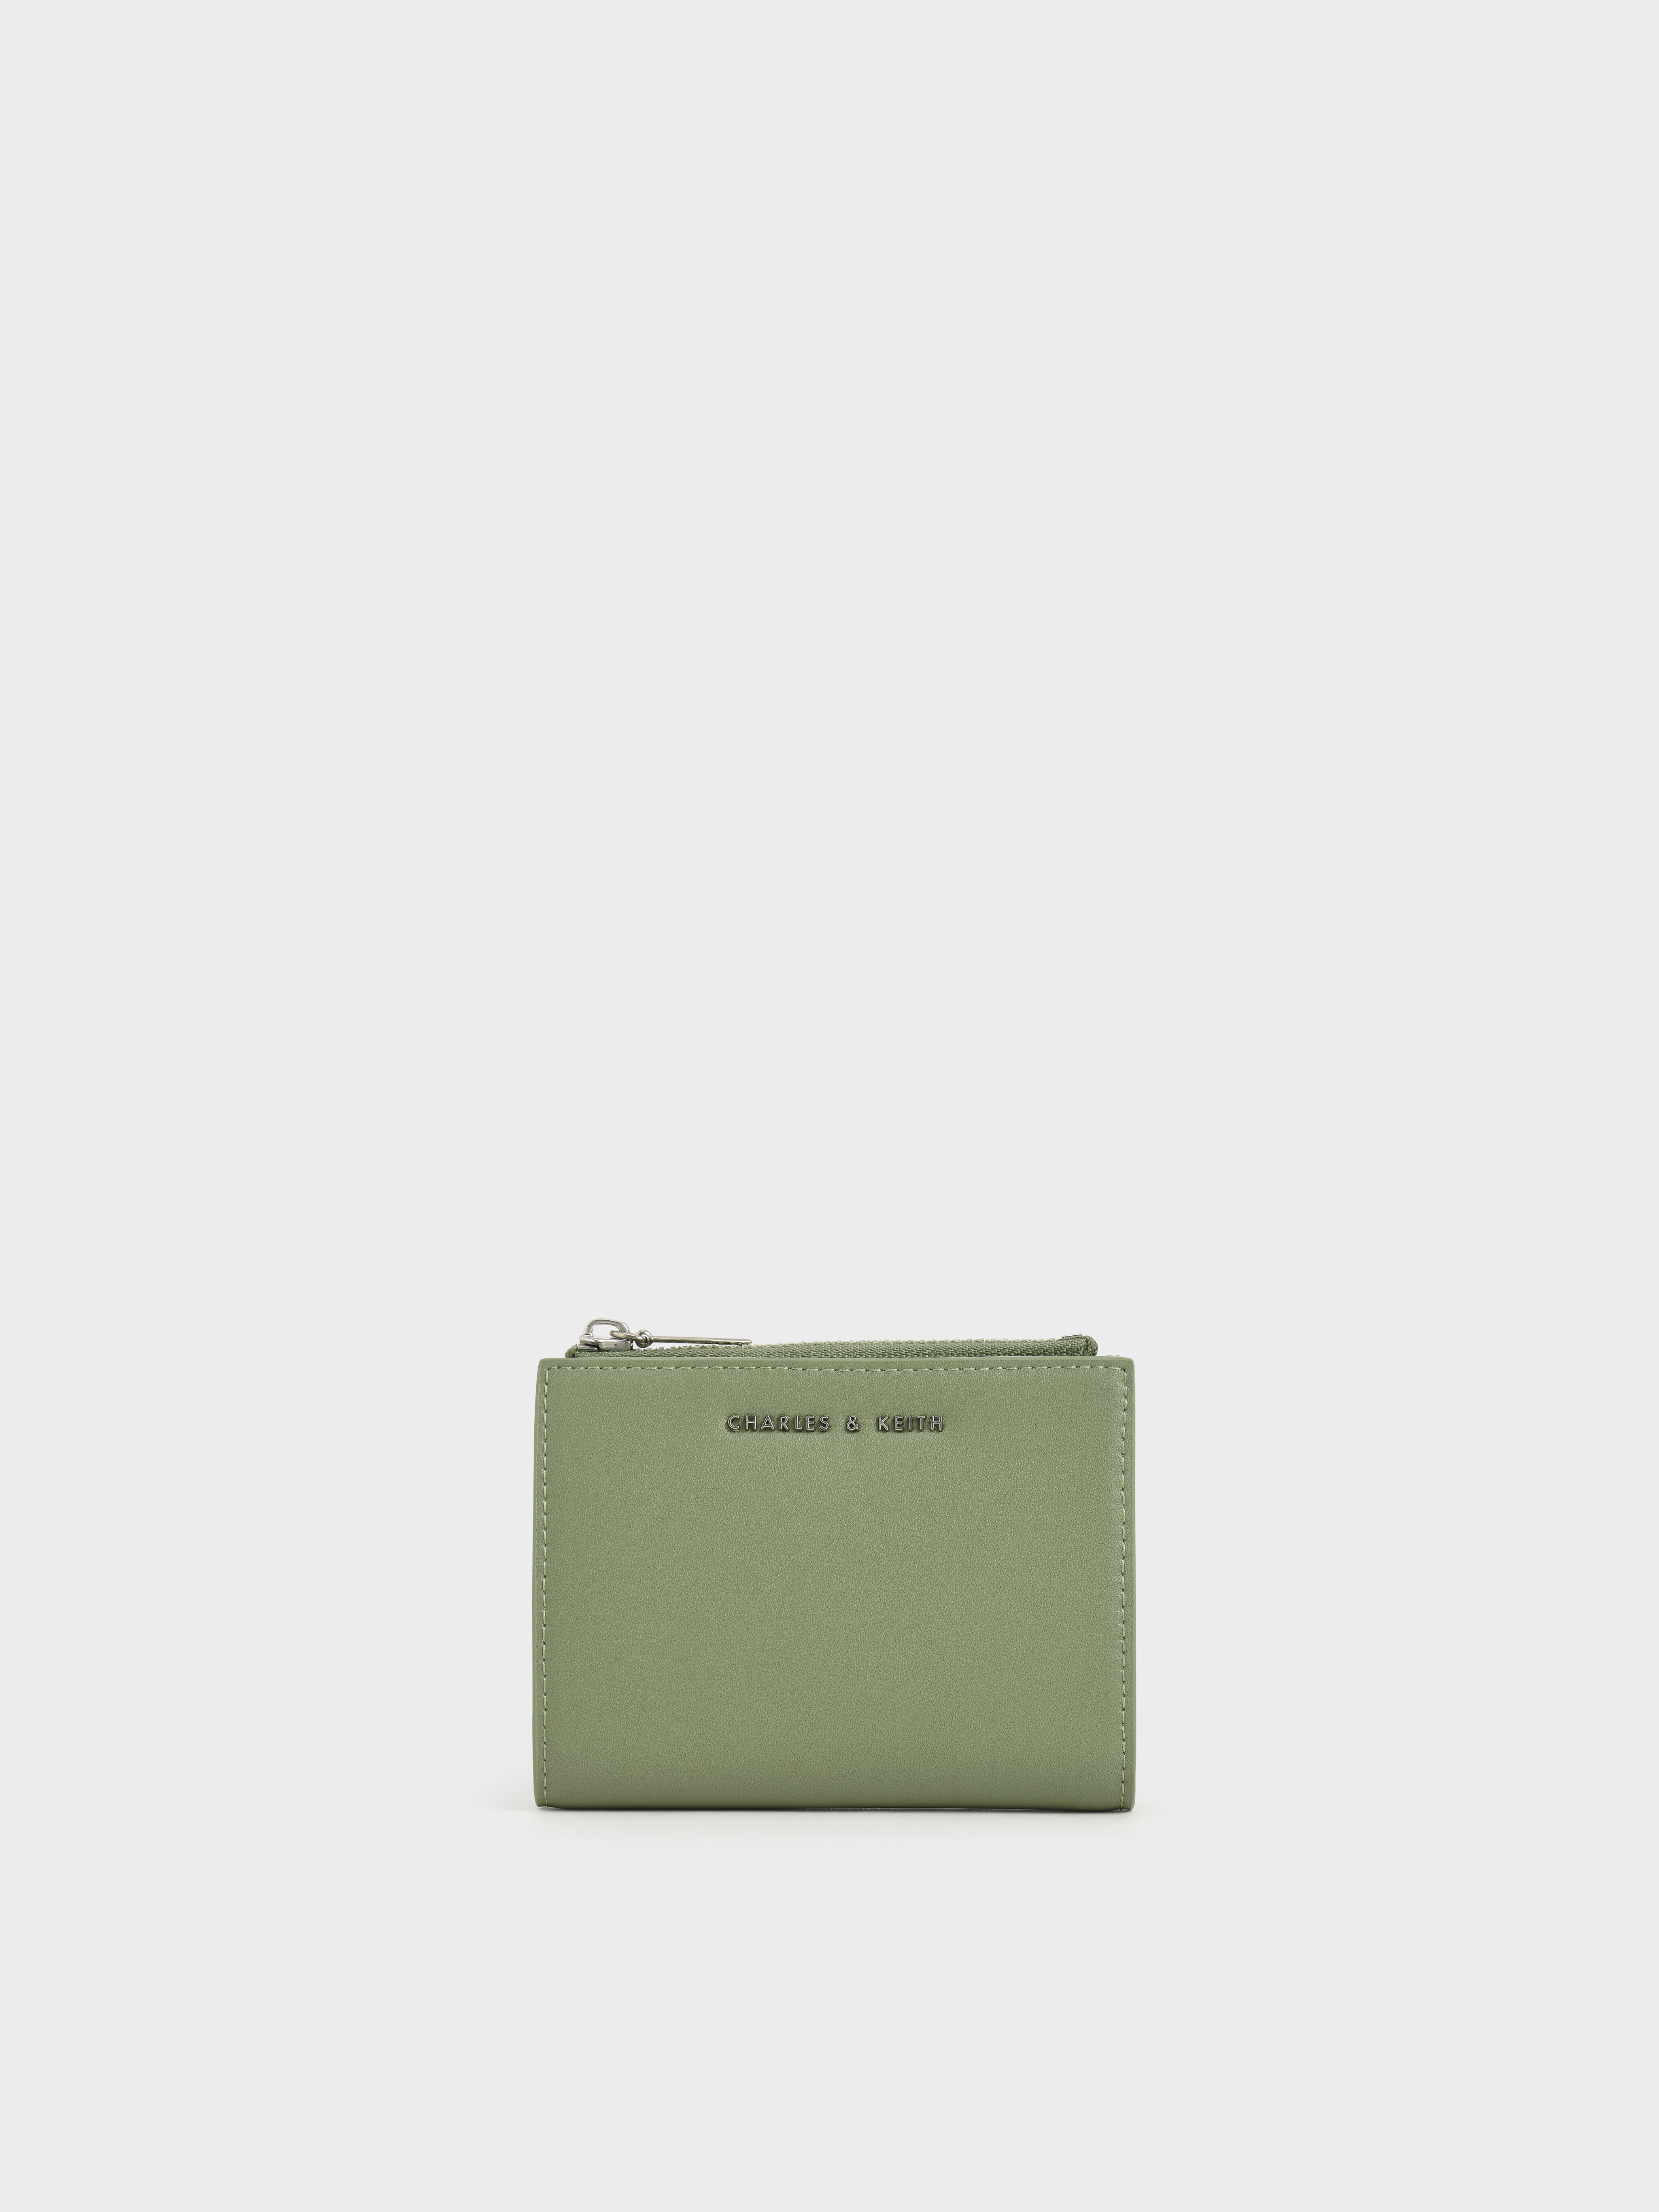 Shop Women's Wallets | Exclusive Styles | CHARLES & KEITH PH